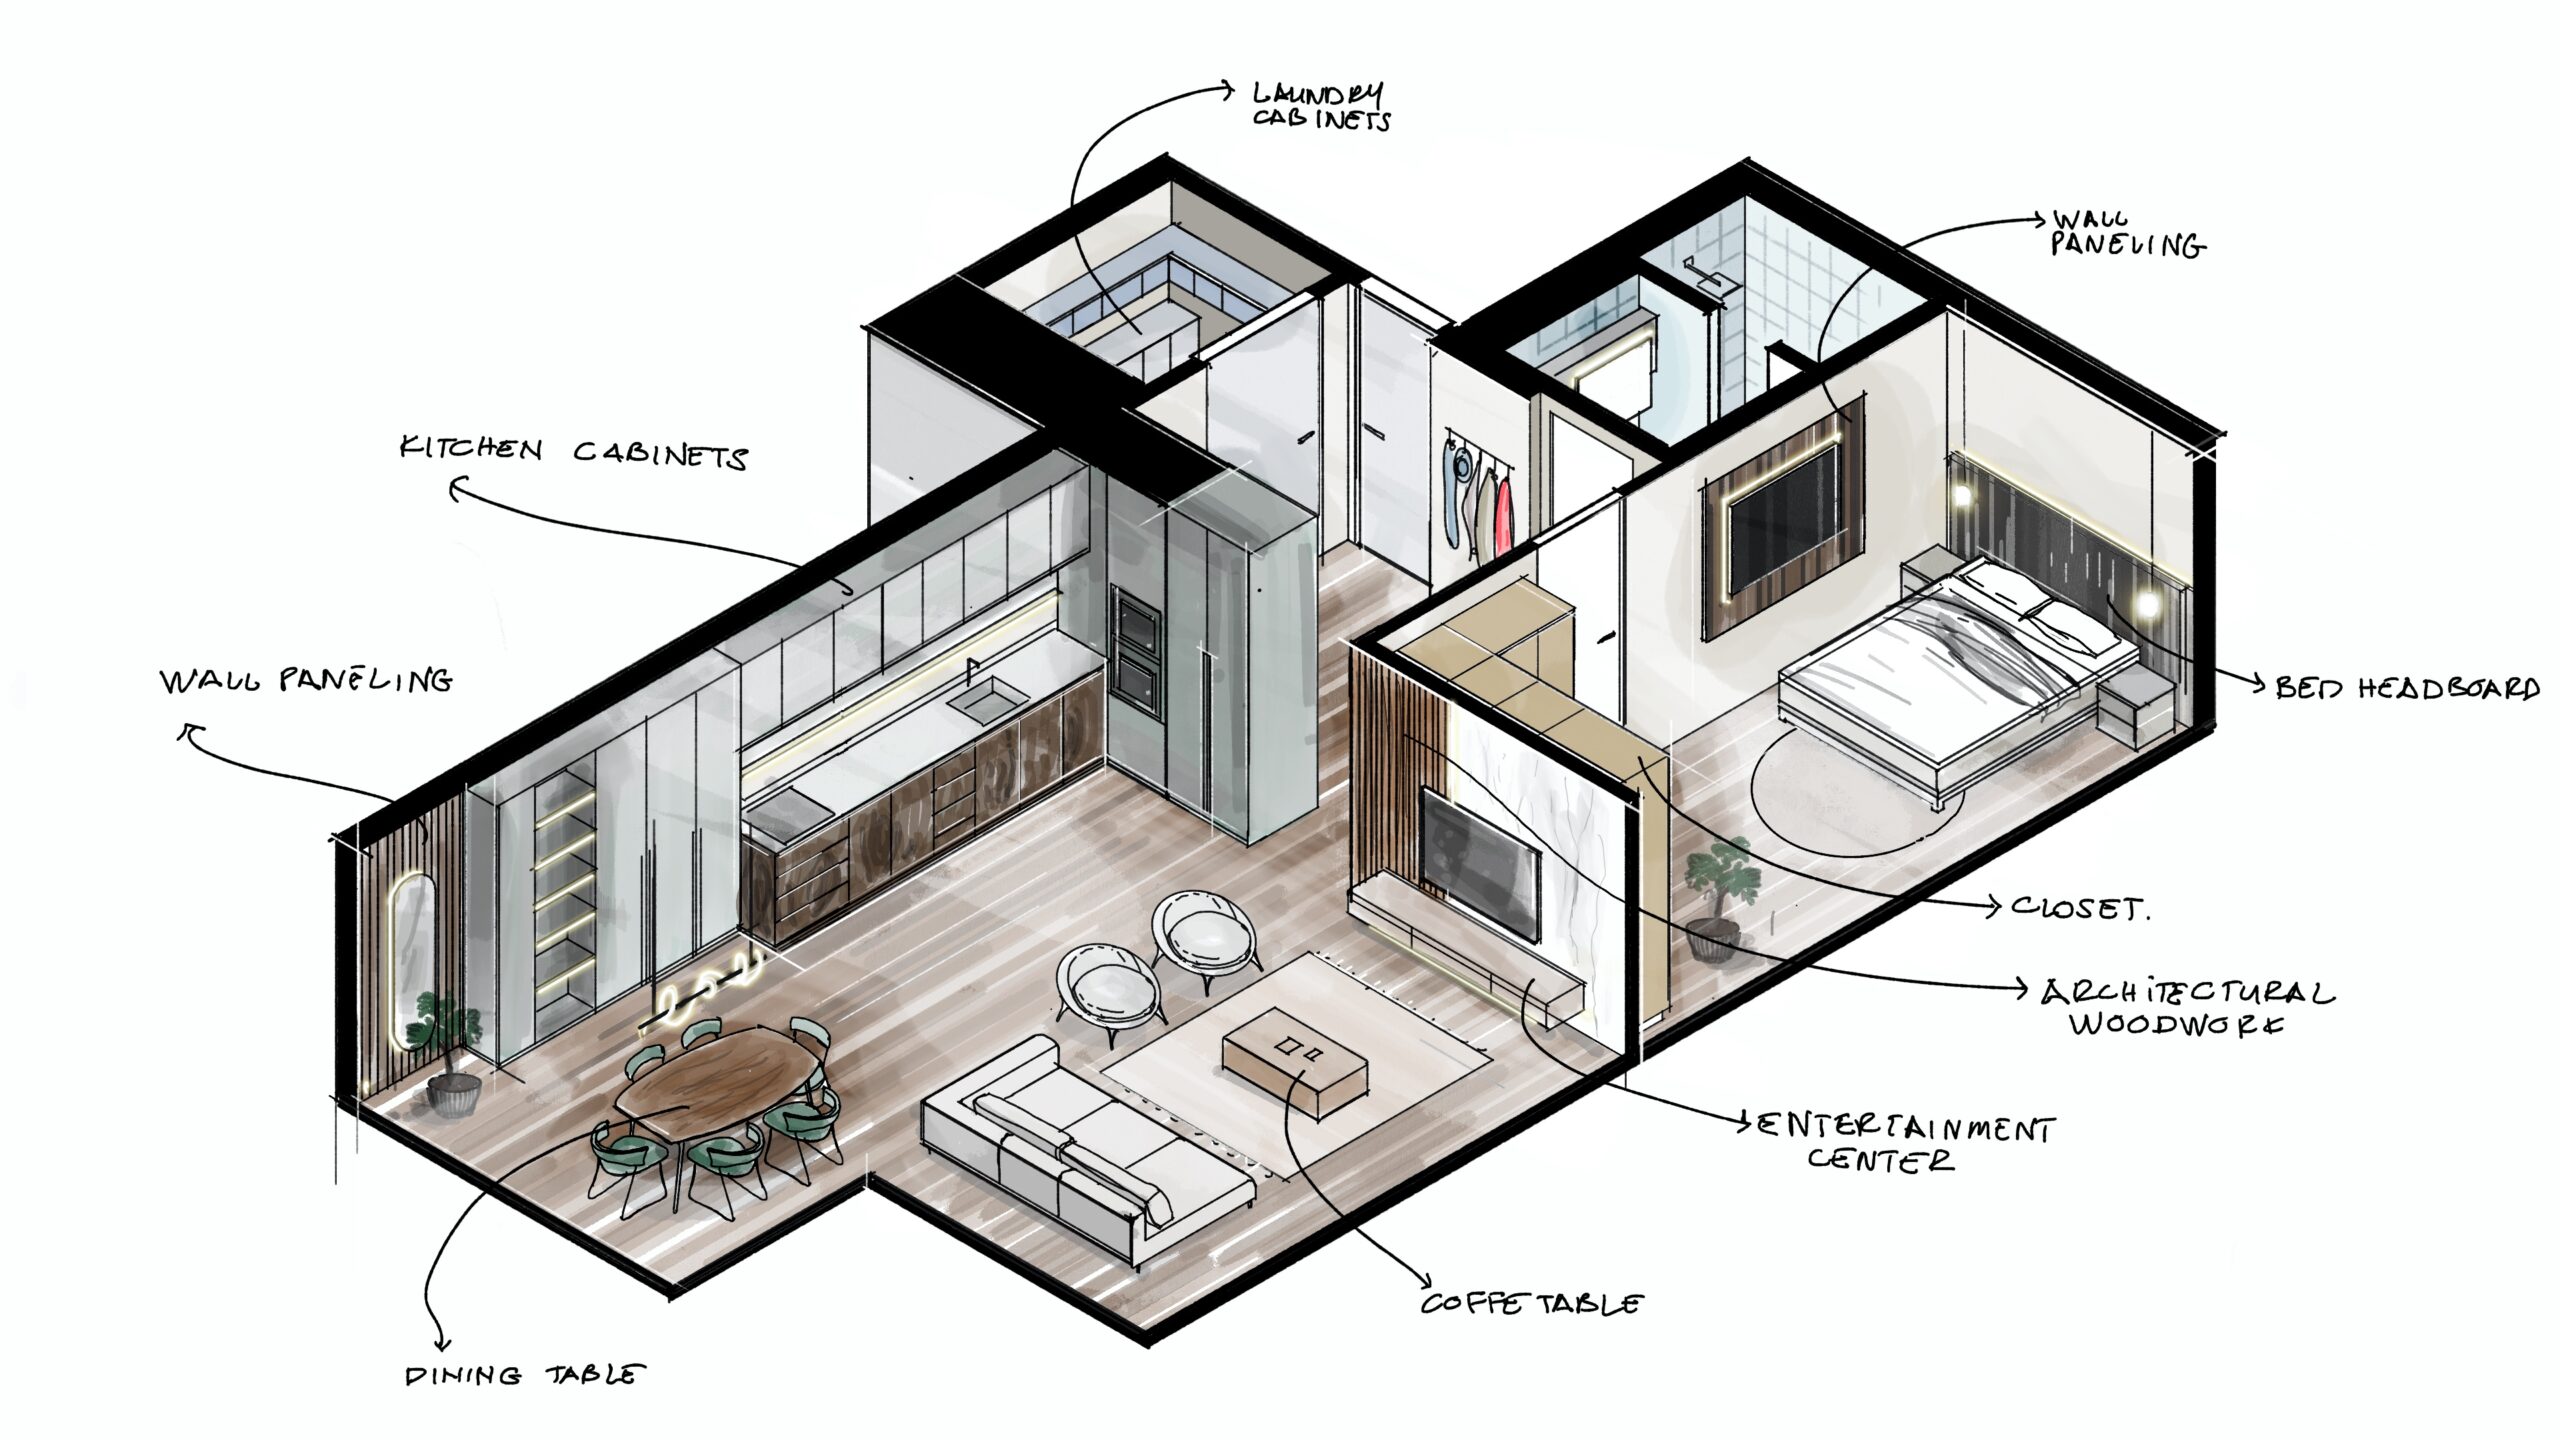 Illustration Map of a House showing where yo use DuraDECOR Thermally Fused Laminates and DuraLUX Acrylic Laminates by Duramar.